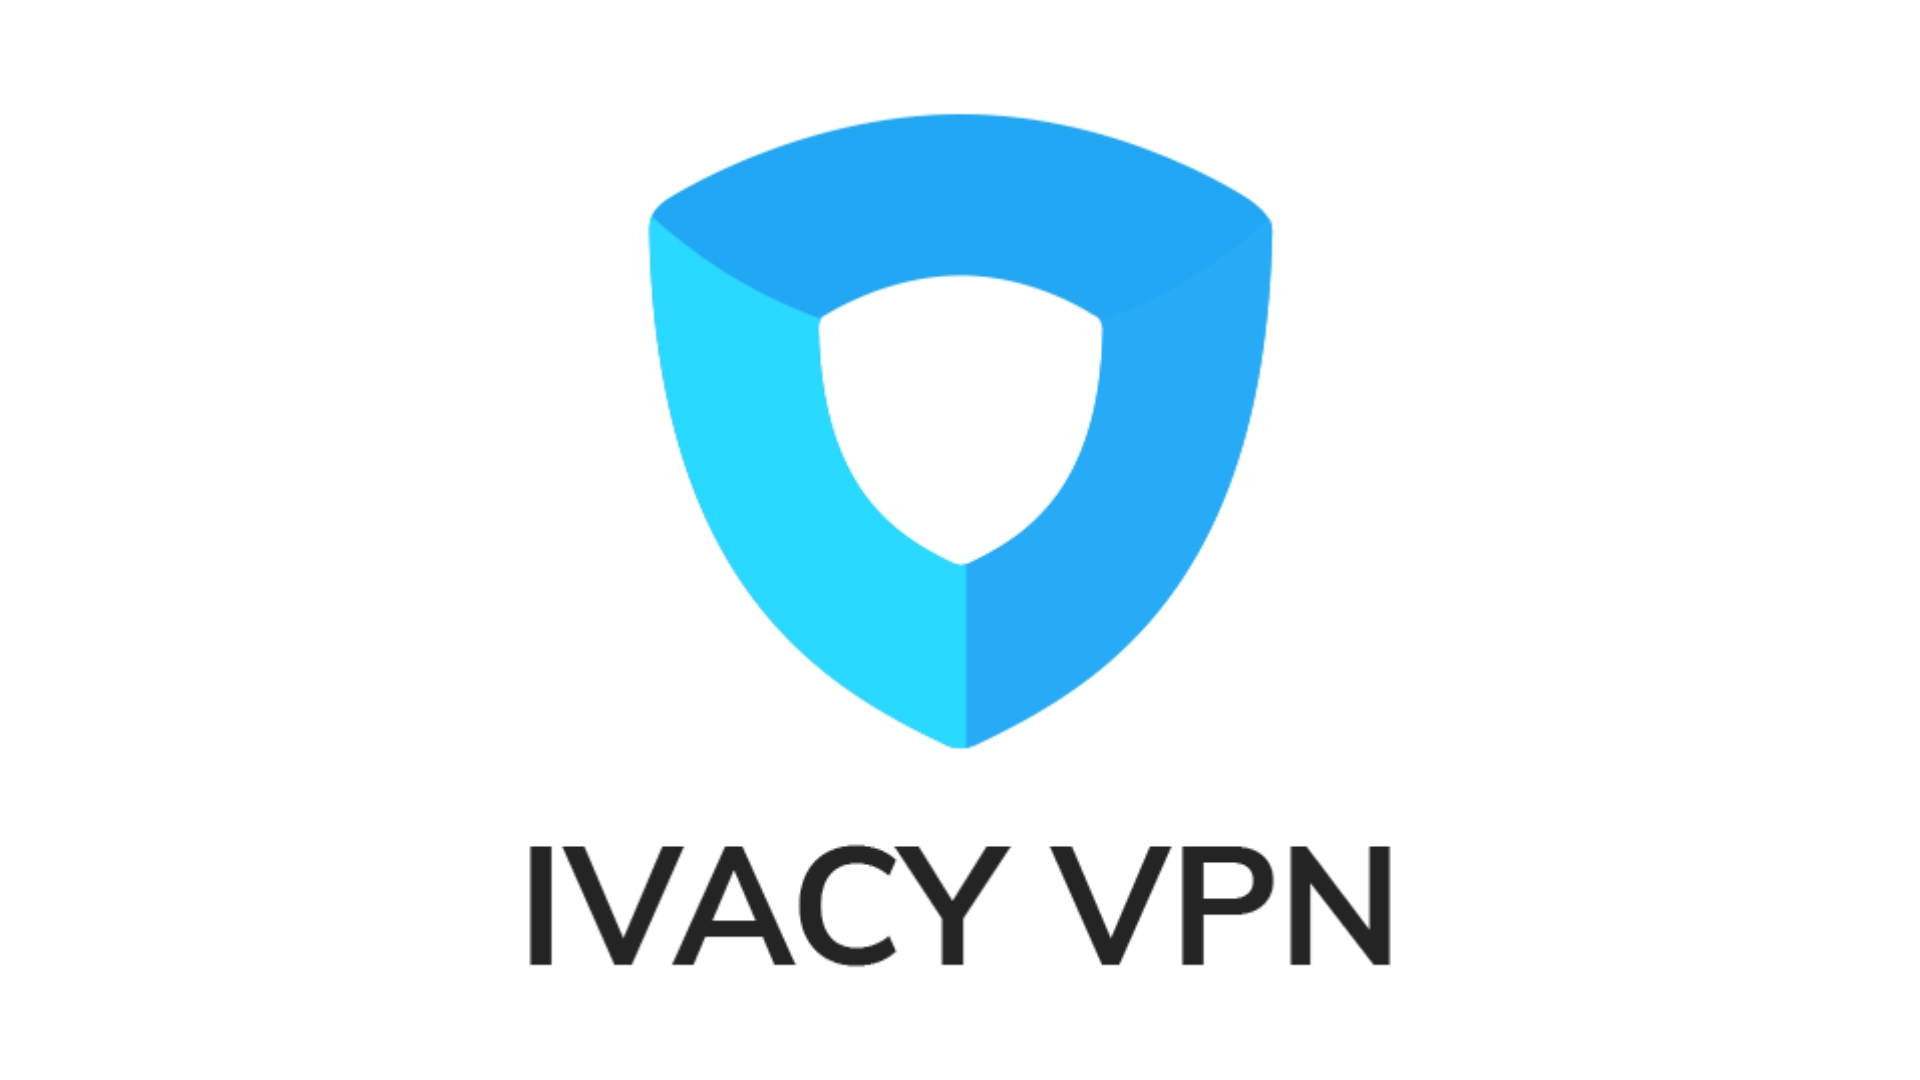 Best VPN for iPad - Ivacy VPN. Image show's the business's logo.